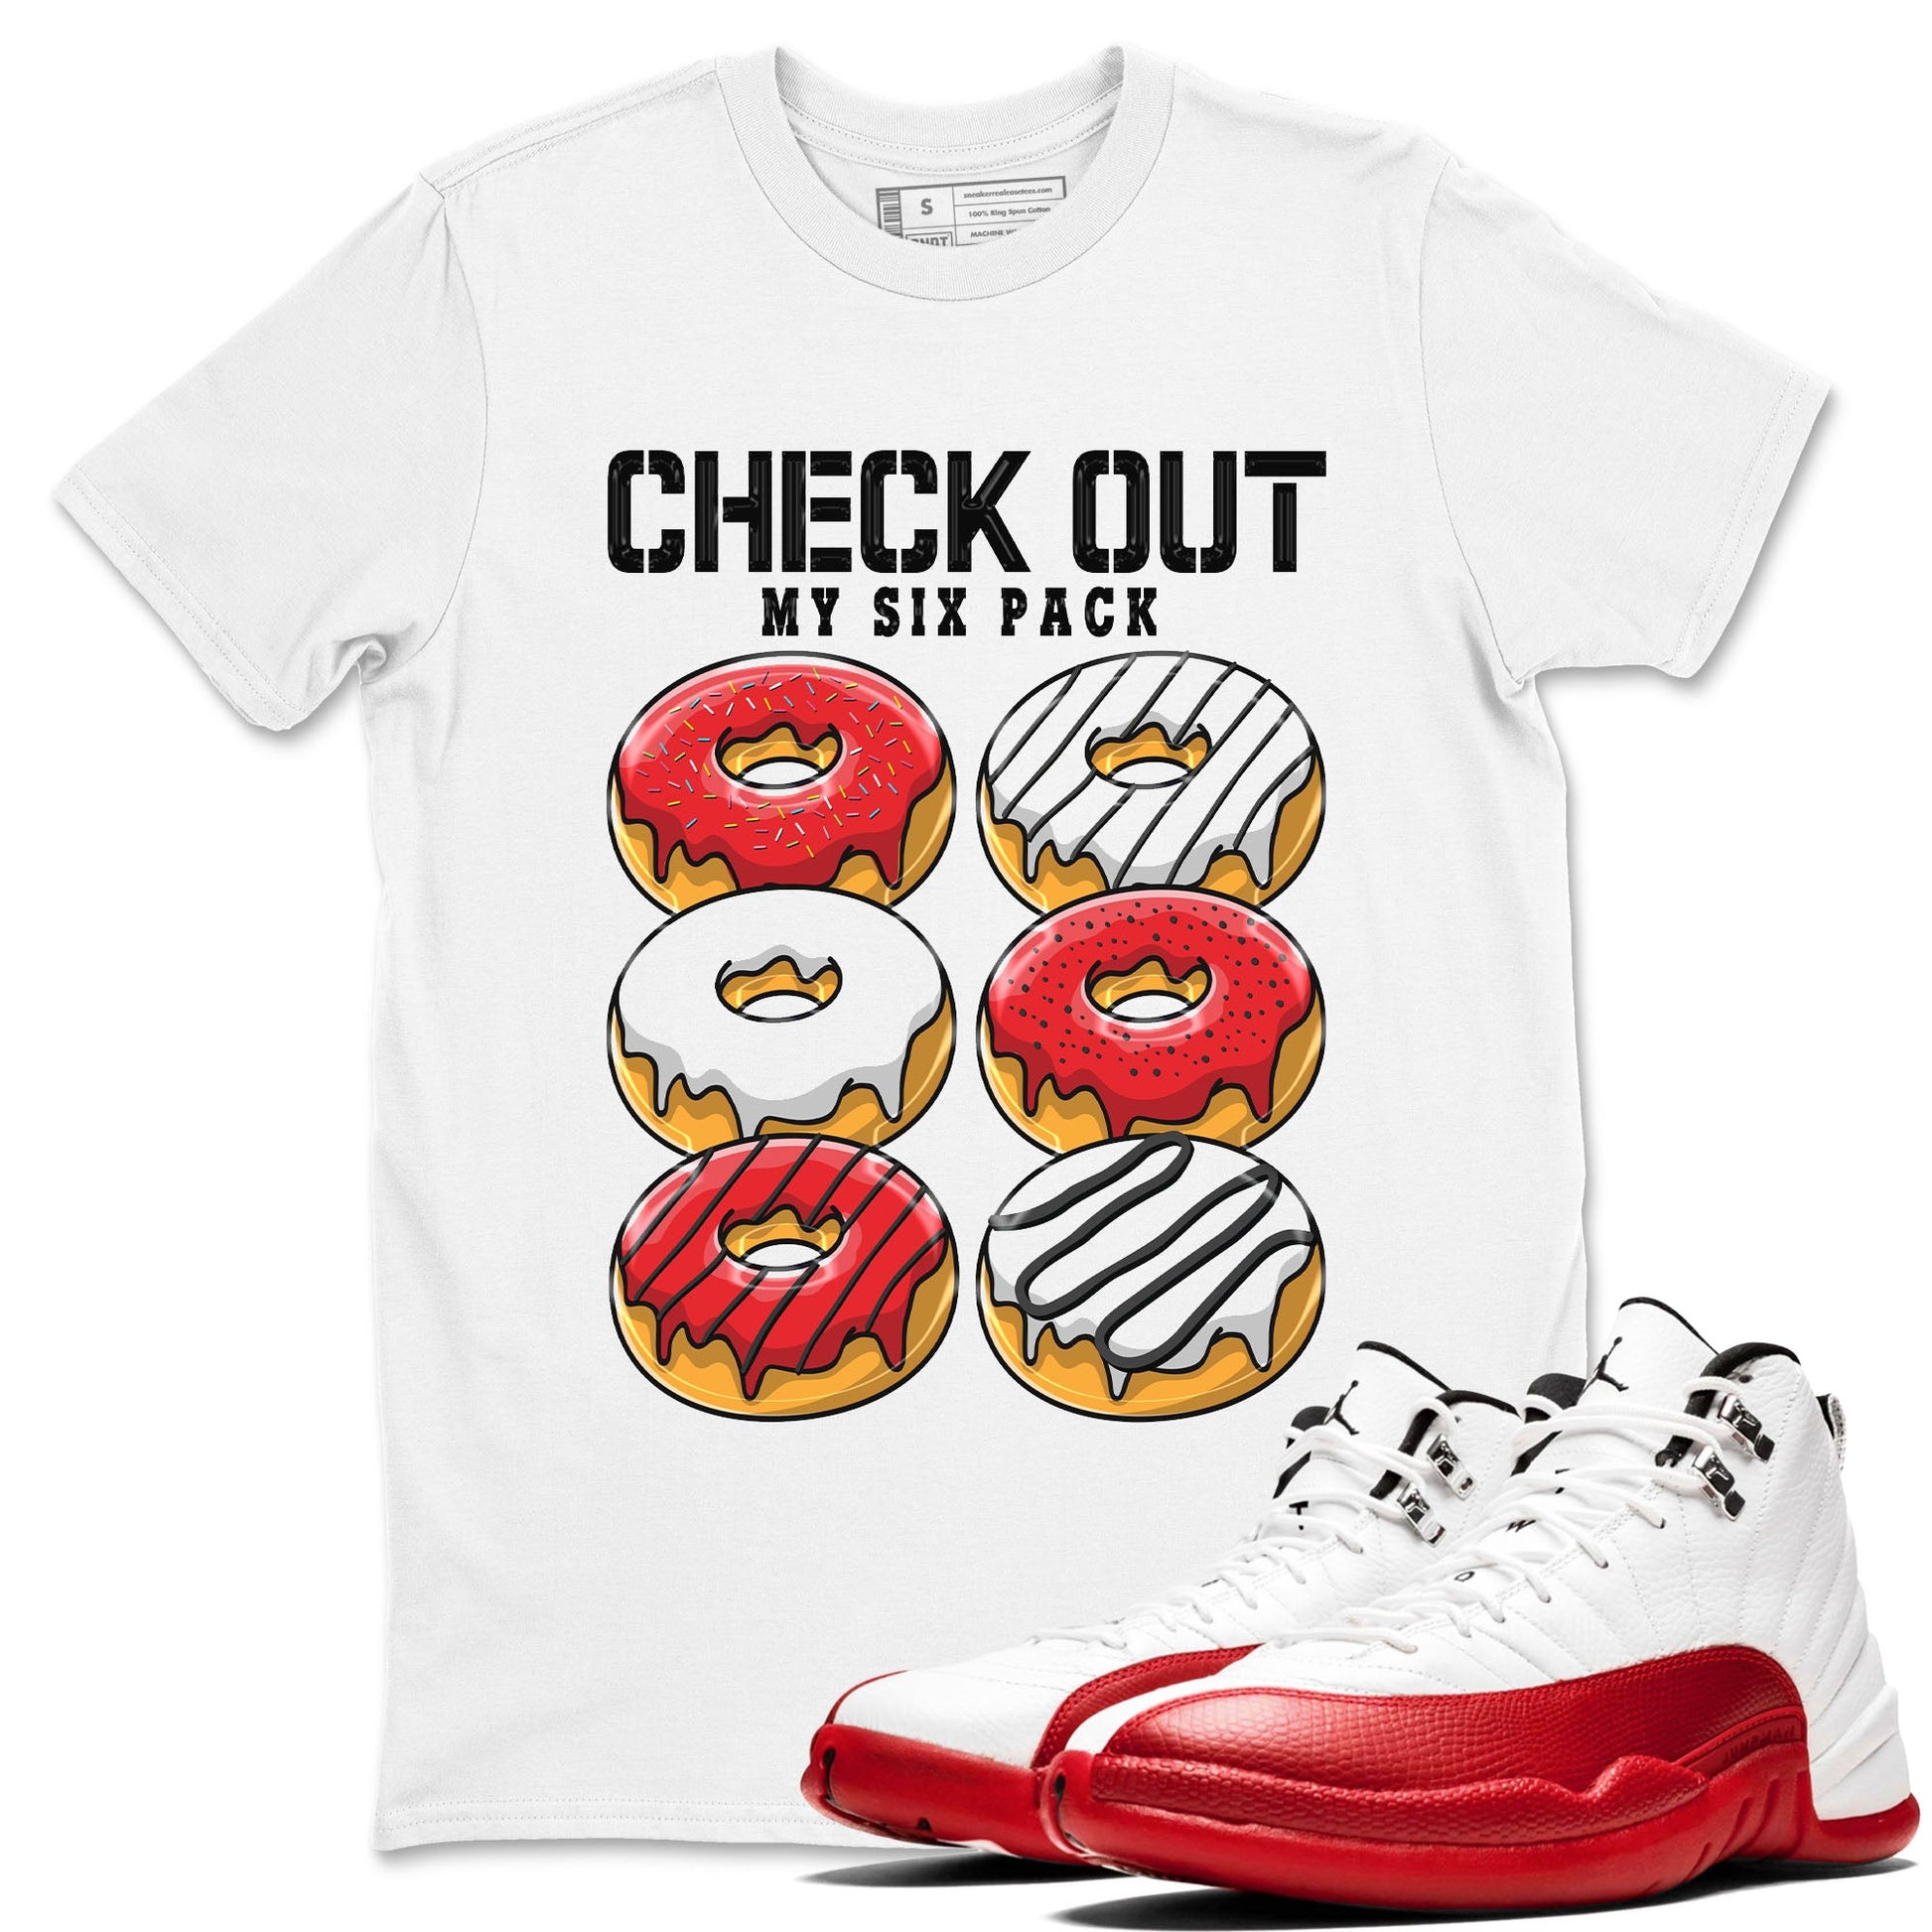 Jordan 12 Retro Cherry shirt to match jordans Varsity Red Check Out My Six Pack special sneaker matching tees 12s Cherry SNRT sneaker tees Unisex White 1 T-Shirt